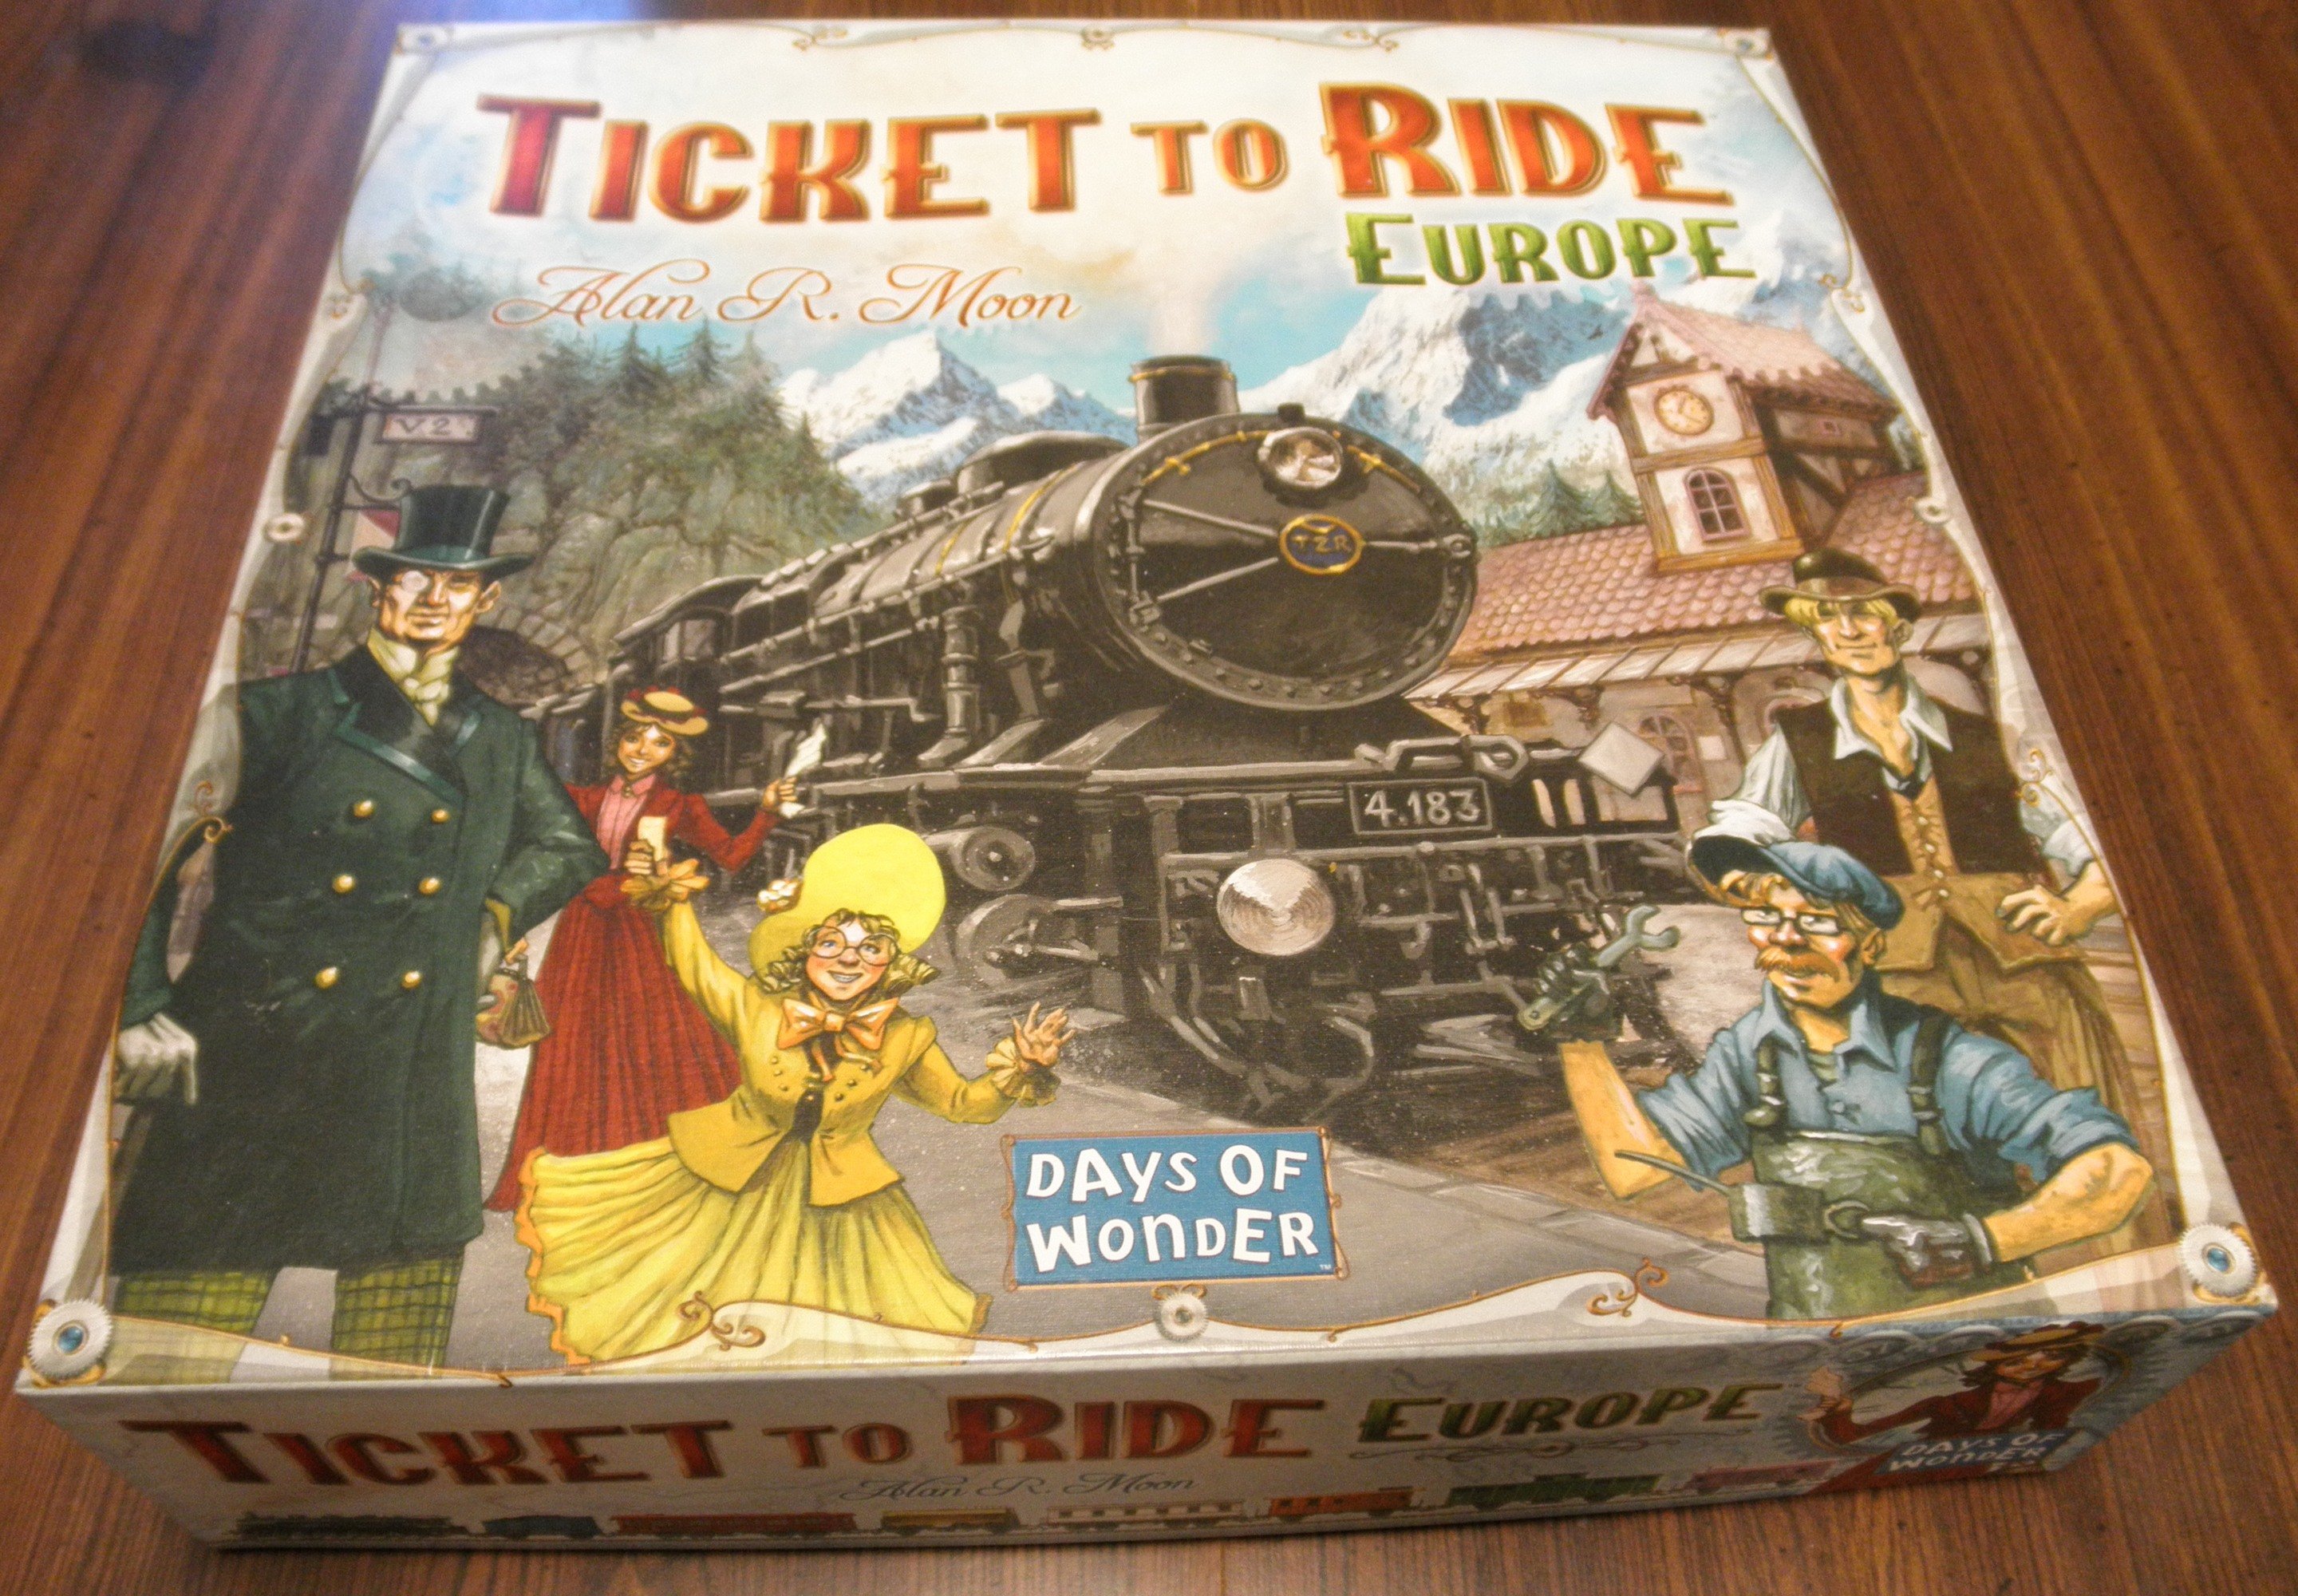 Ticket To Ride Board Game From Days Of Wonder Alan Moon Featured on TableTop 